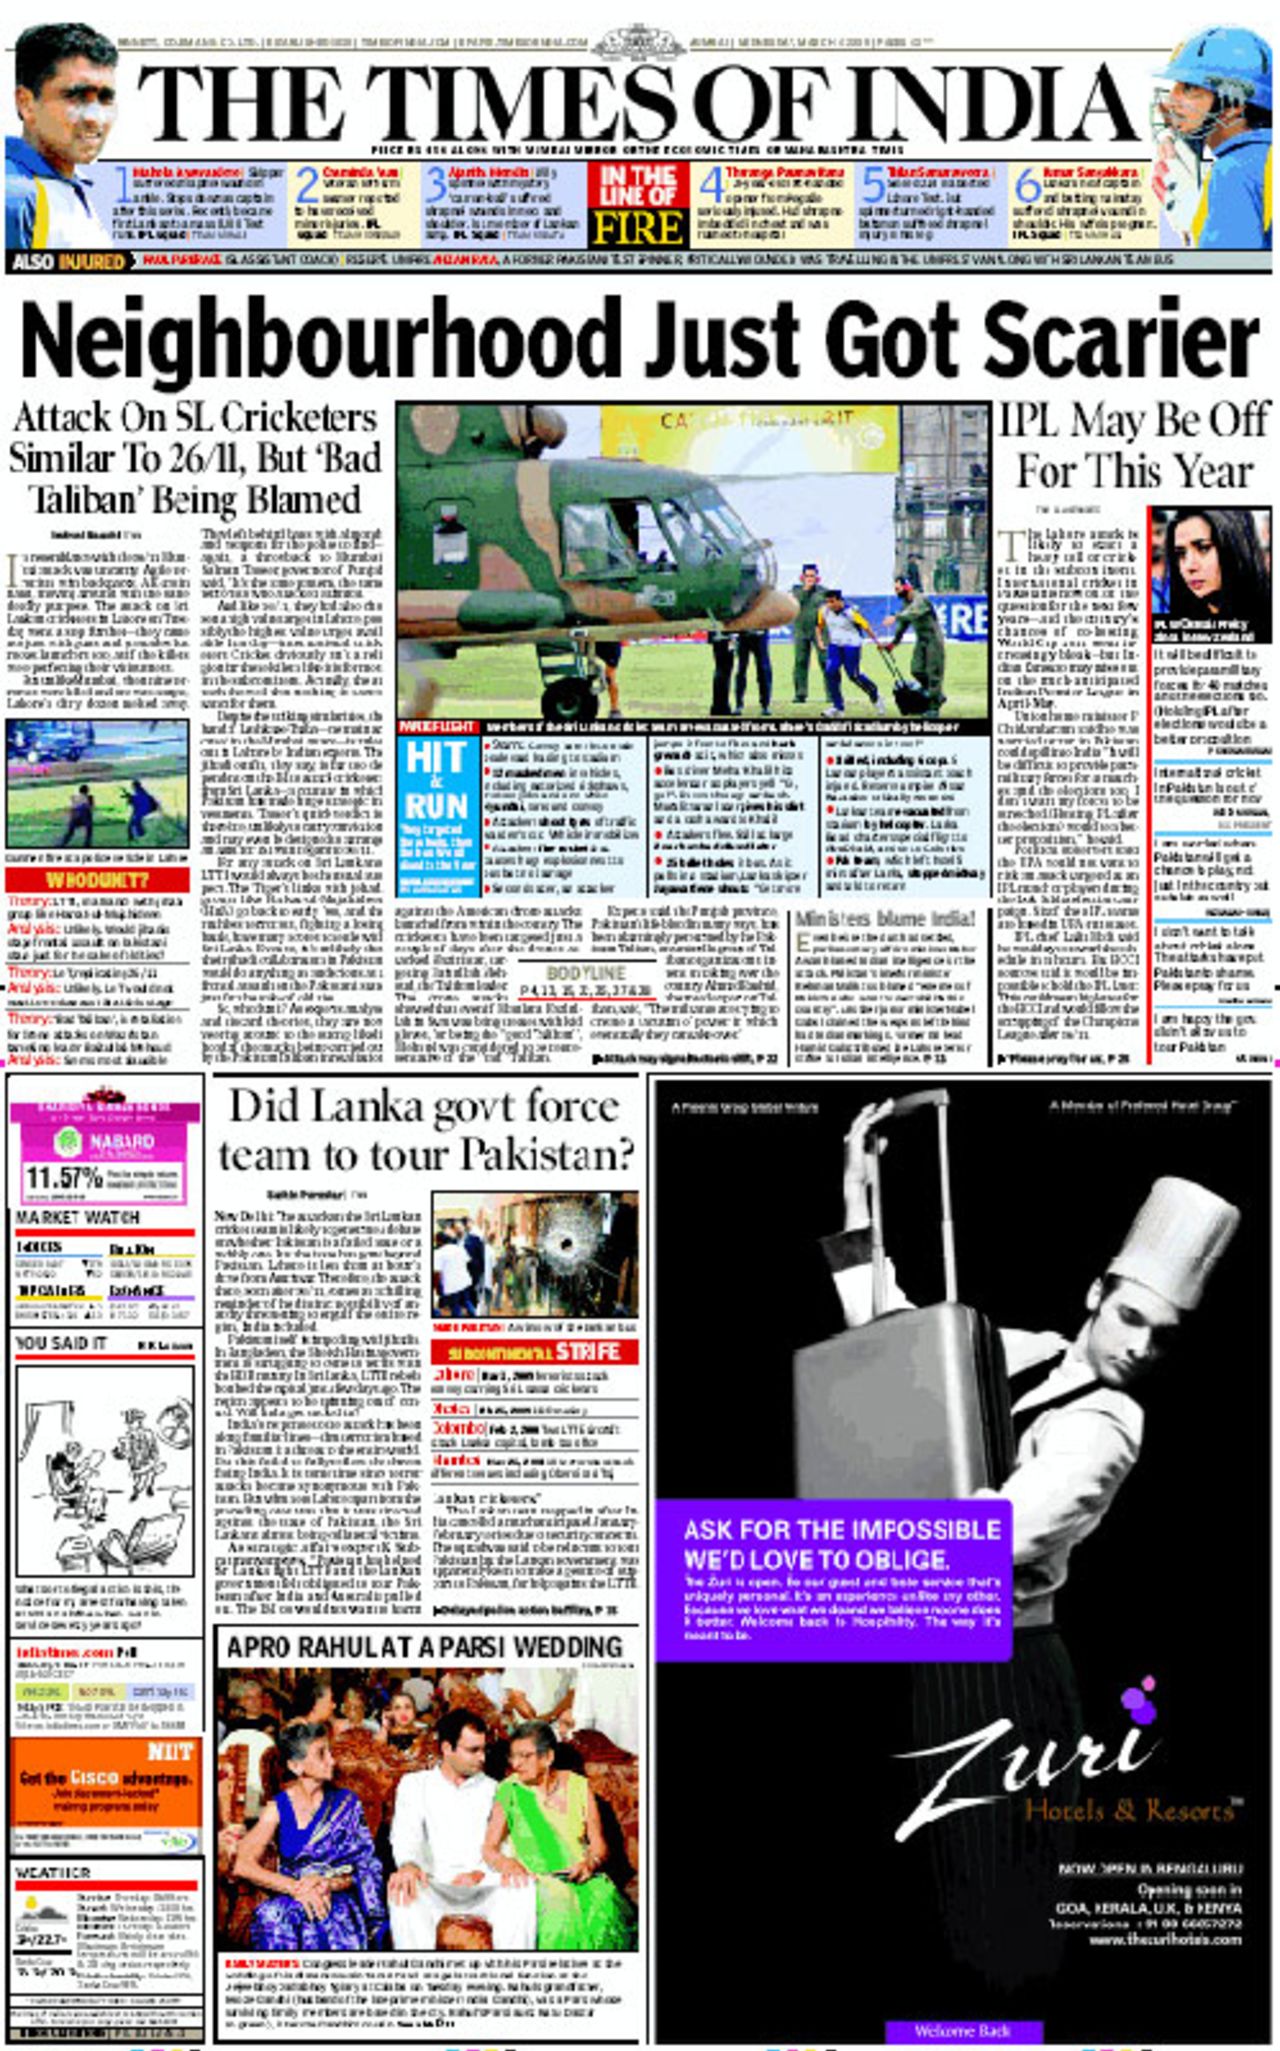 The <I>Times of India</I> on the Lahore terrorist attack, March 4, 2009